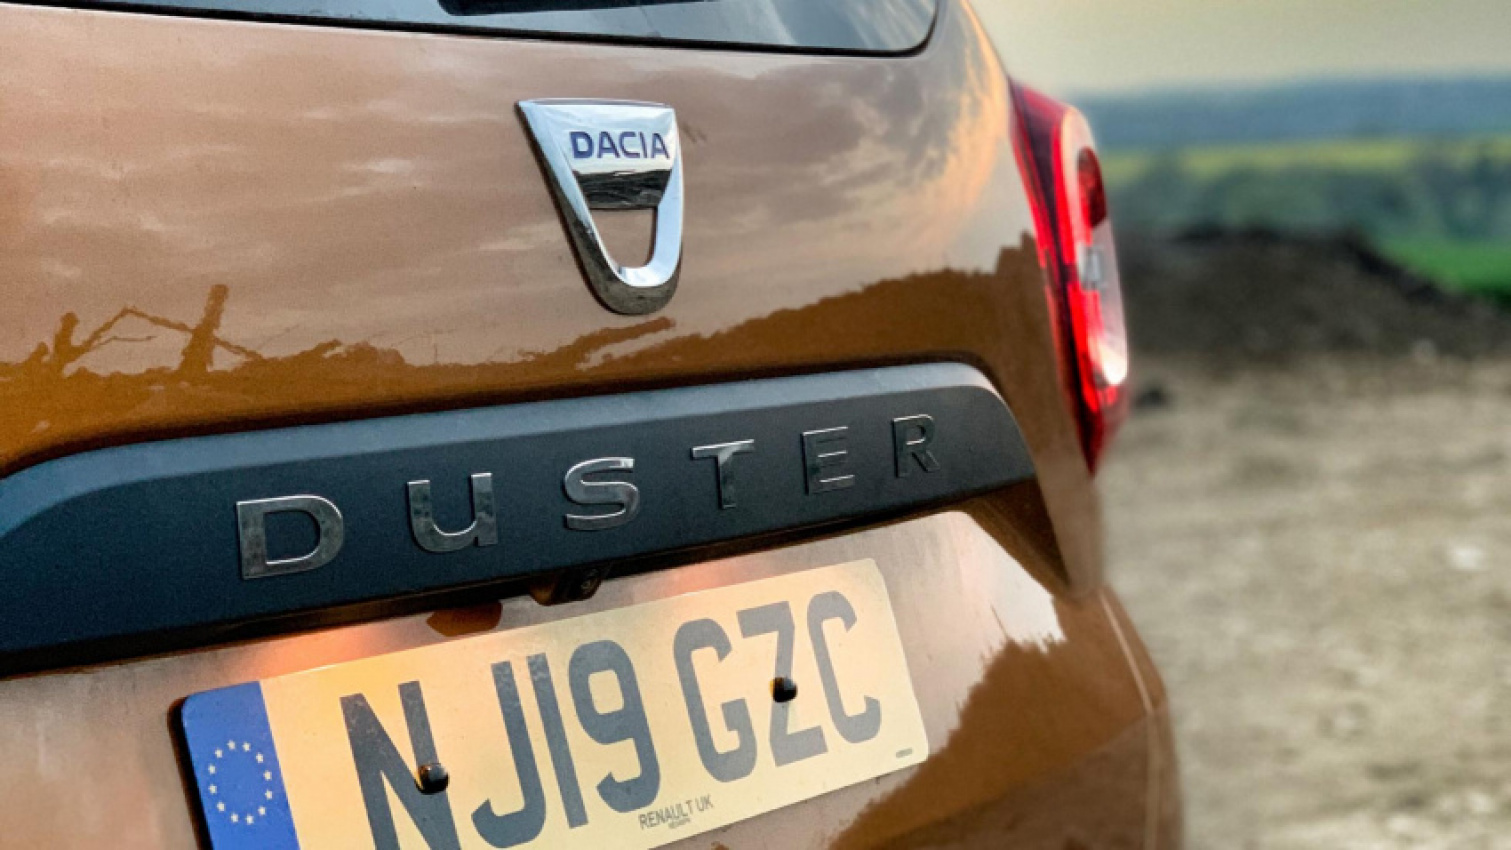 autos, cars, garage, meet the knuckle duster, our dacia project car